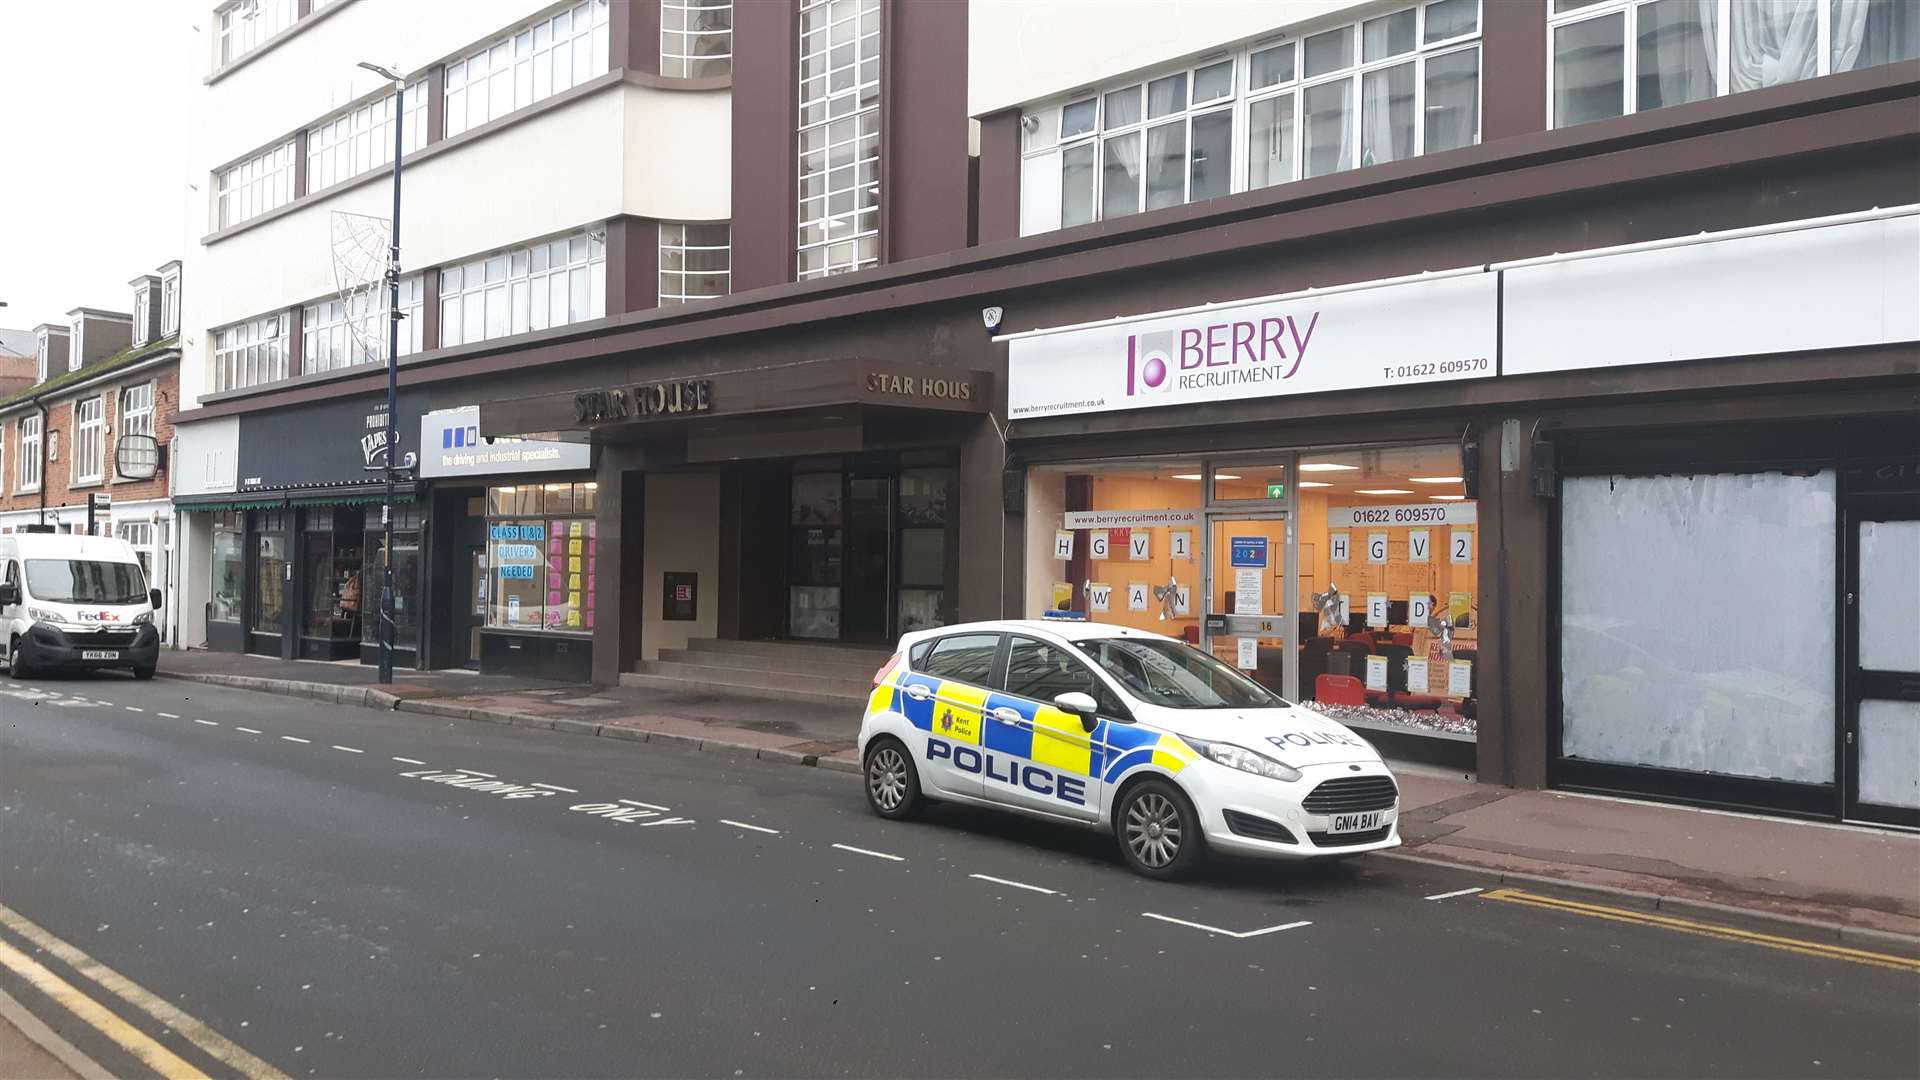 Police were still at the scene on Monday, after the stabbing the night before